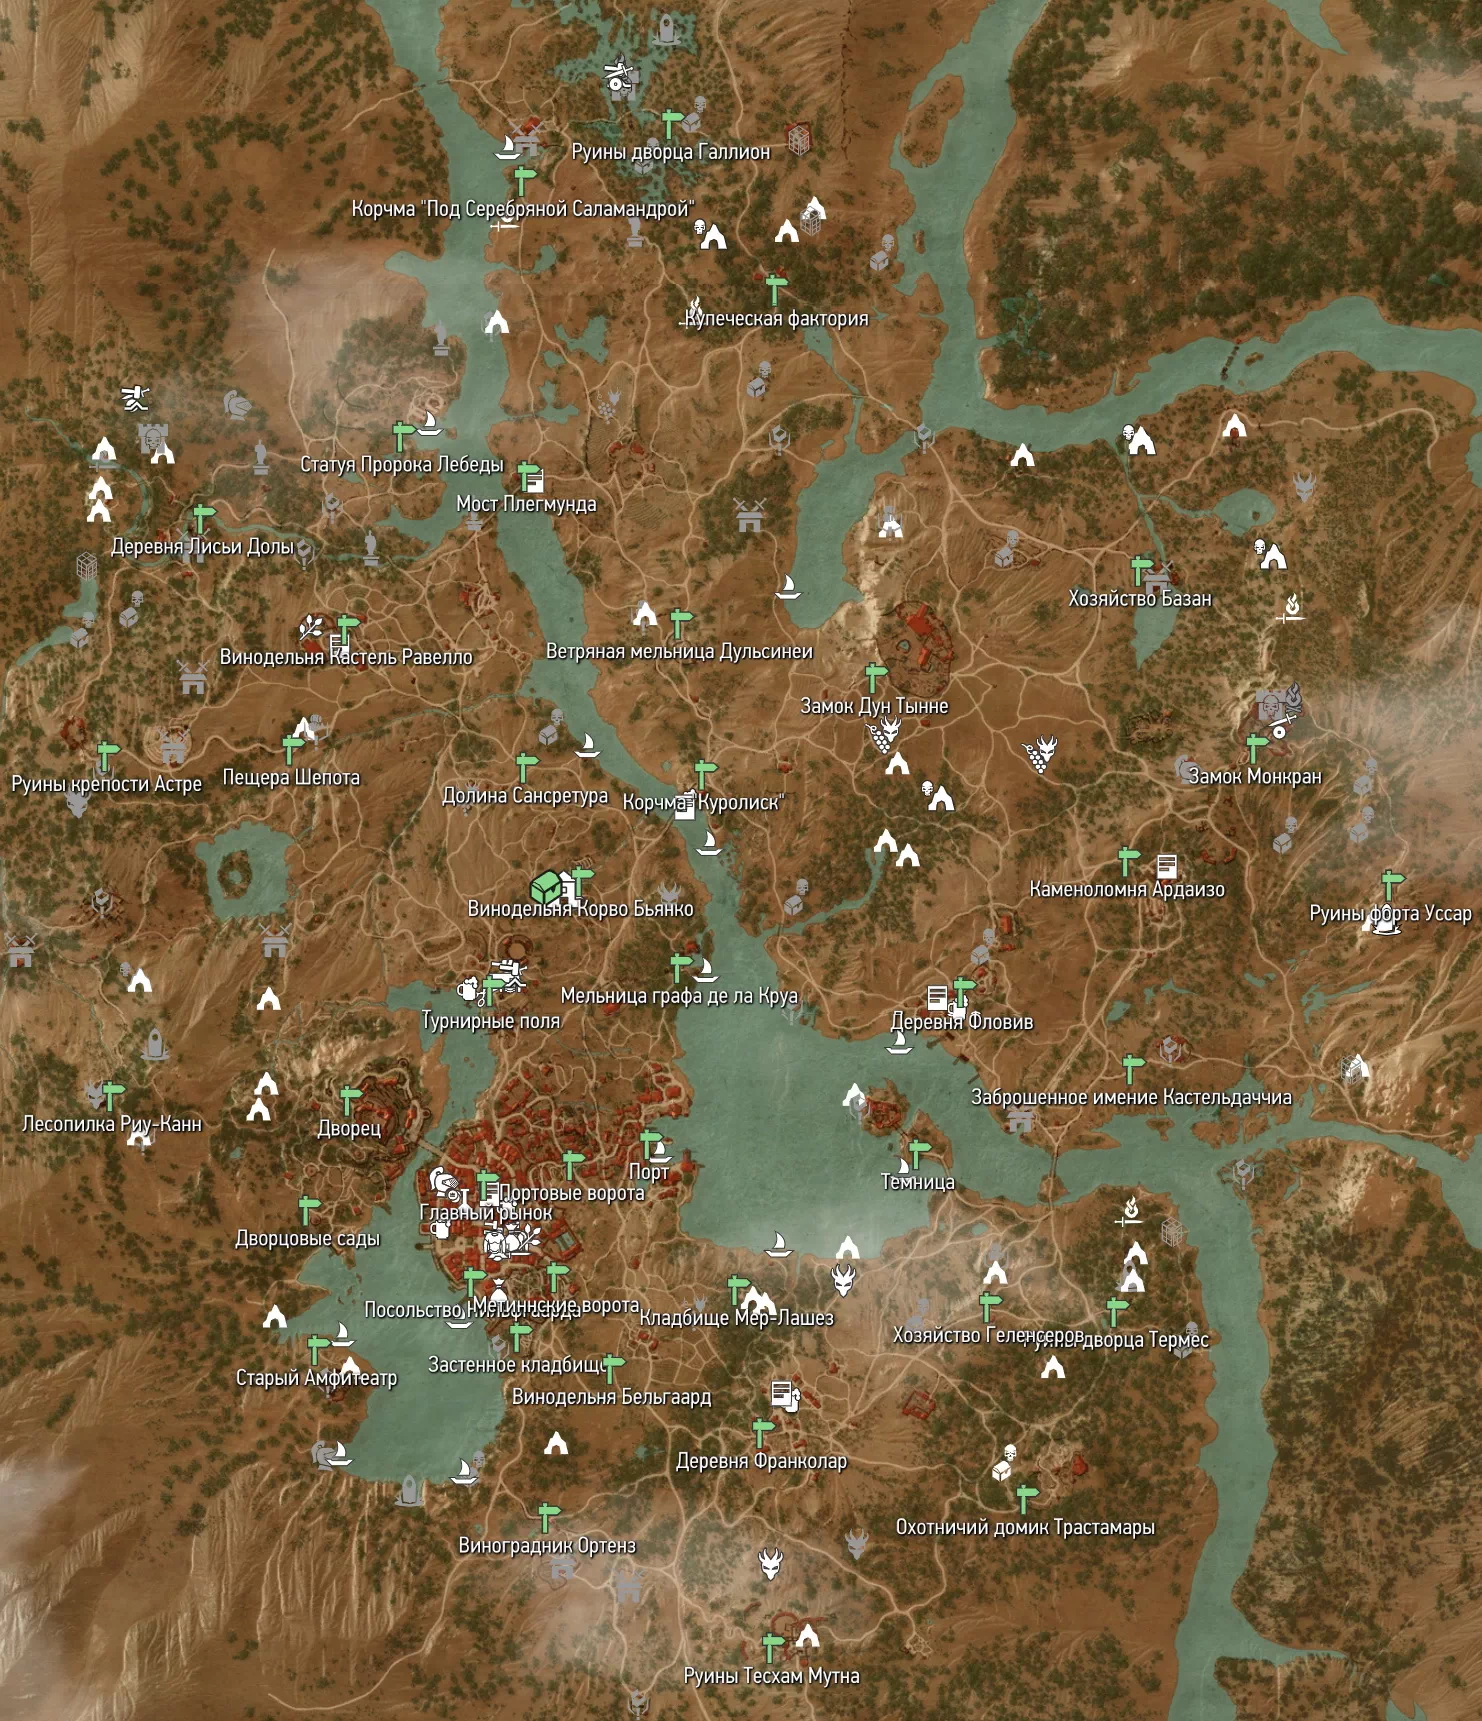 The witcher 3 witcher gear locations фото 40